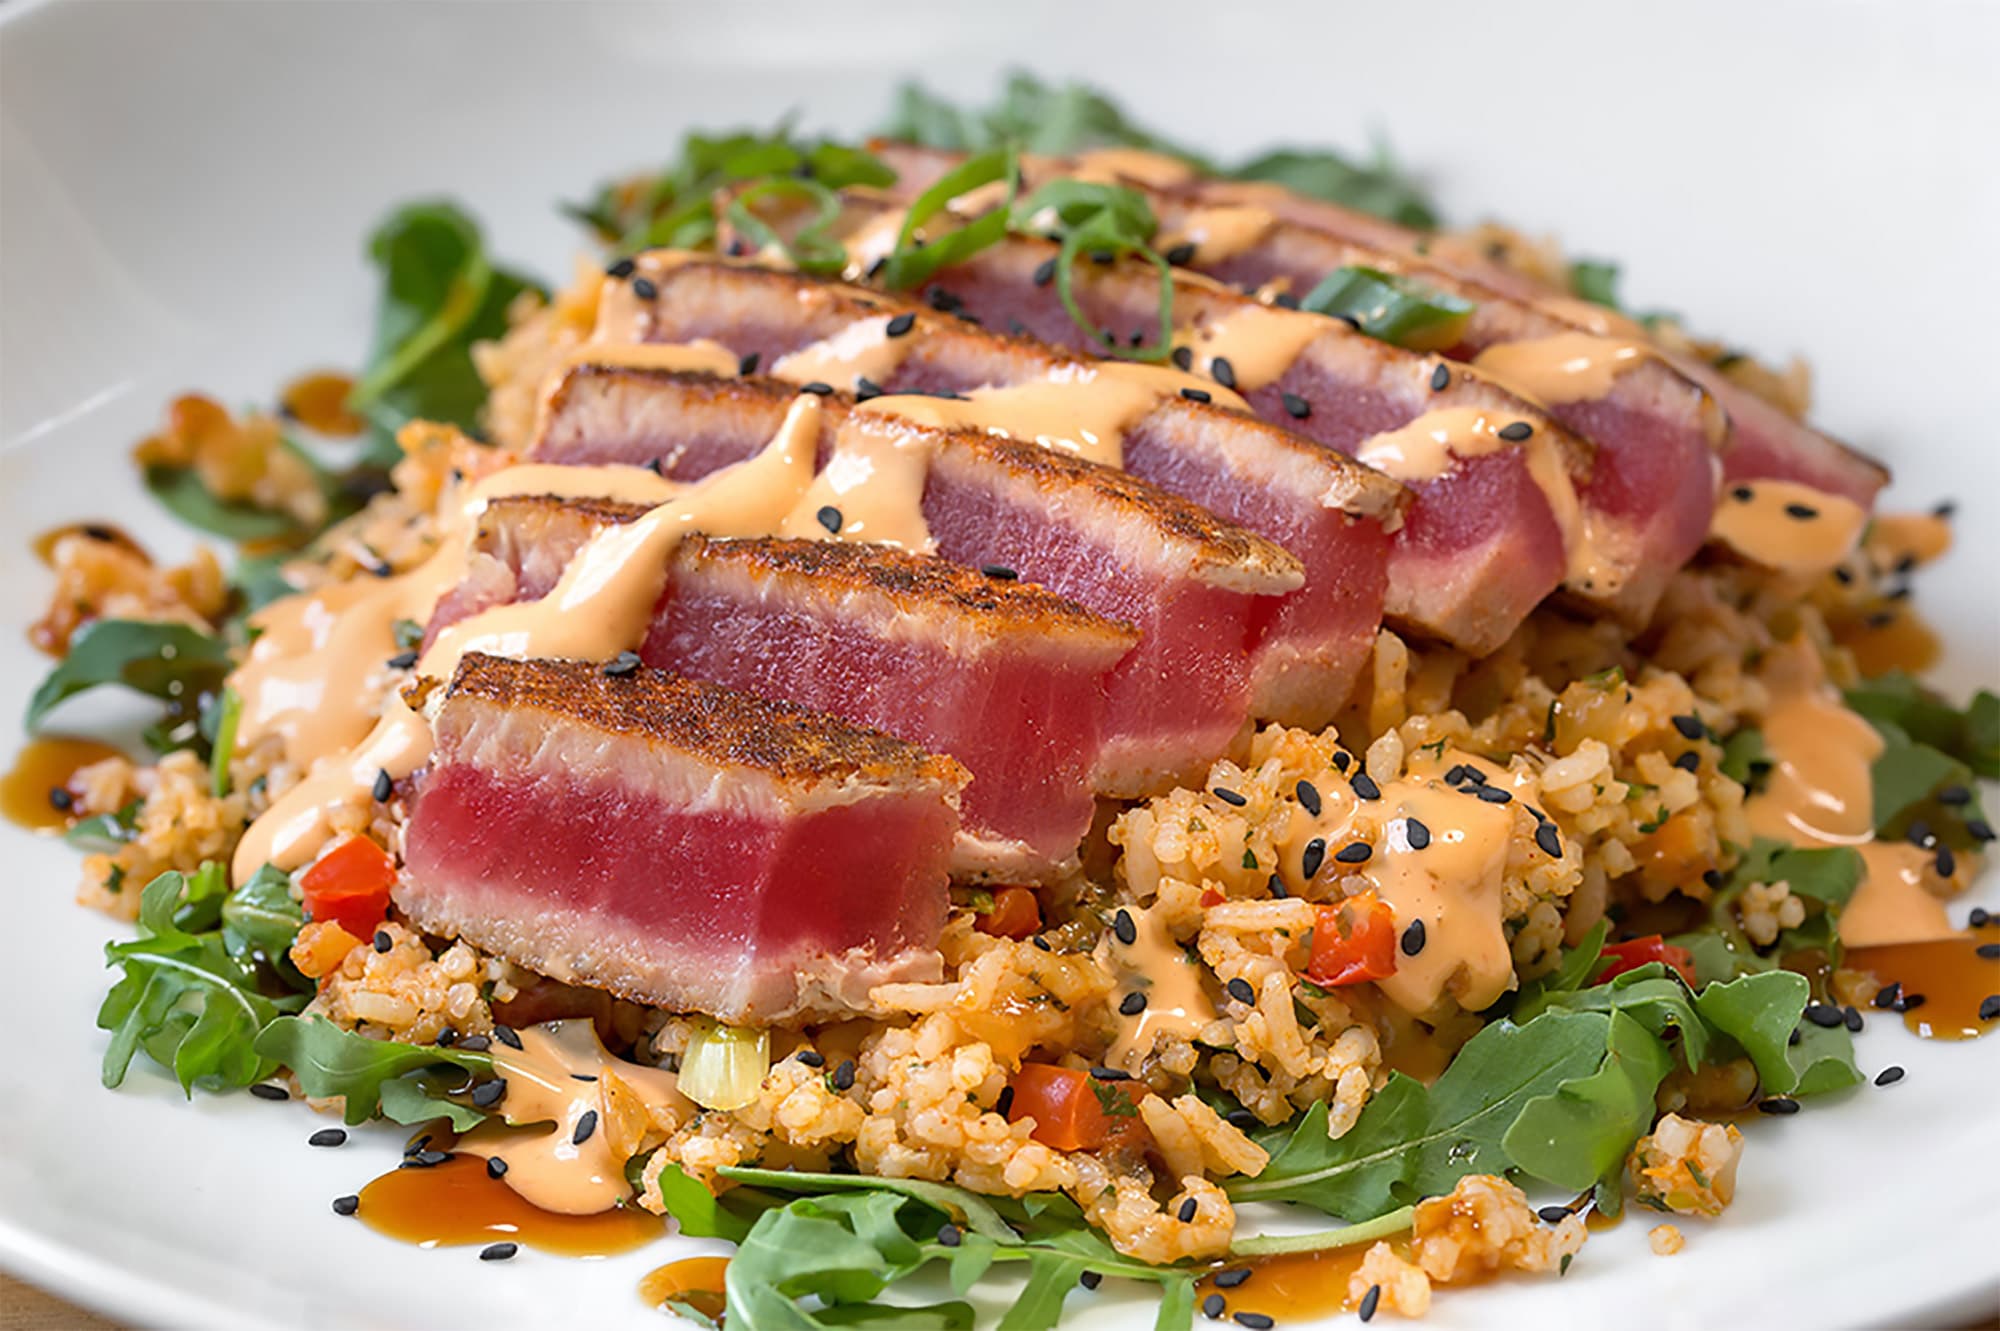 blackened tuna over rice at Harry's Seafood Bar and Grille in Lakeland, FL